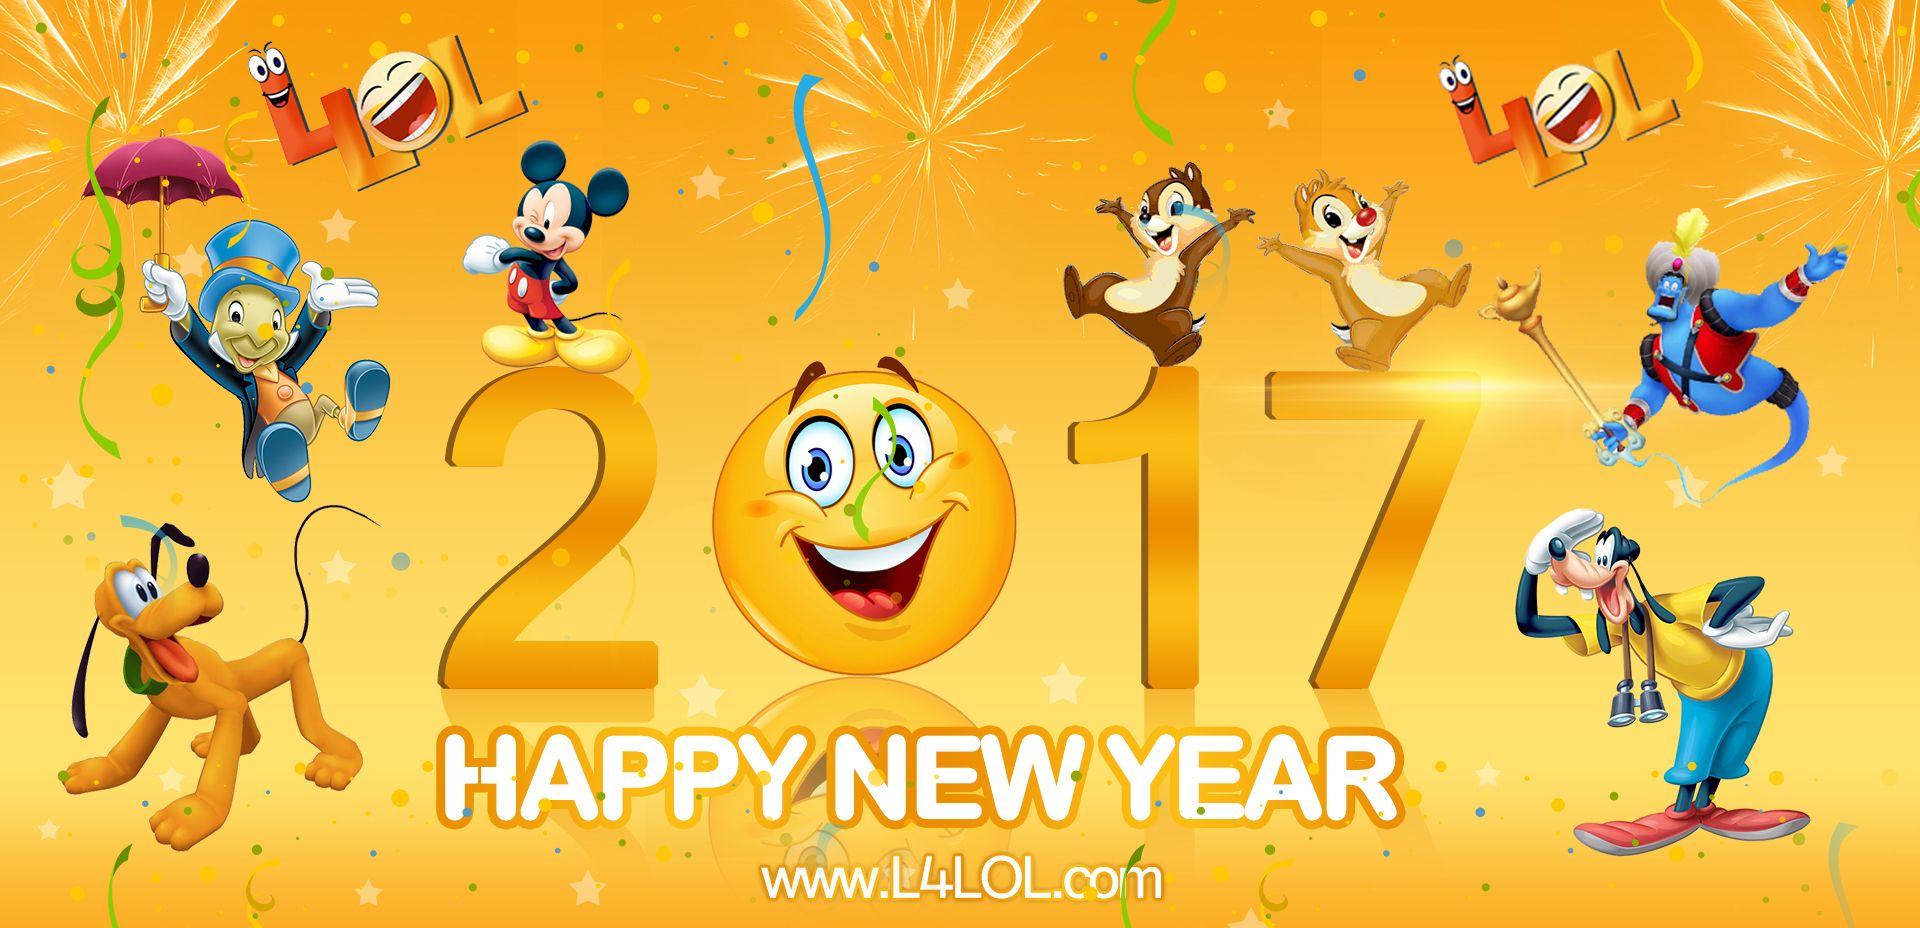 New Year Background Wallpaper 11174